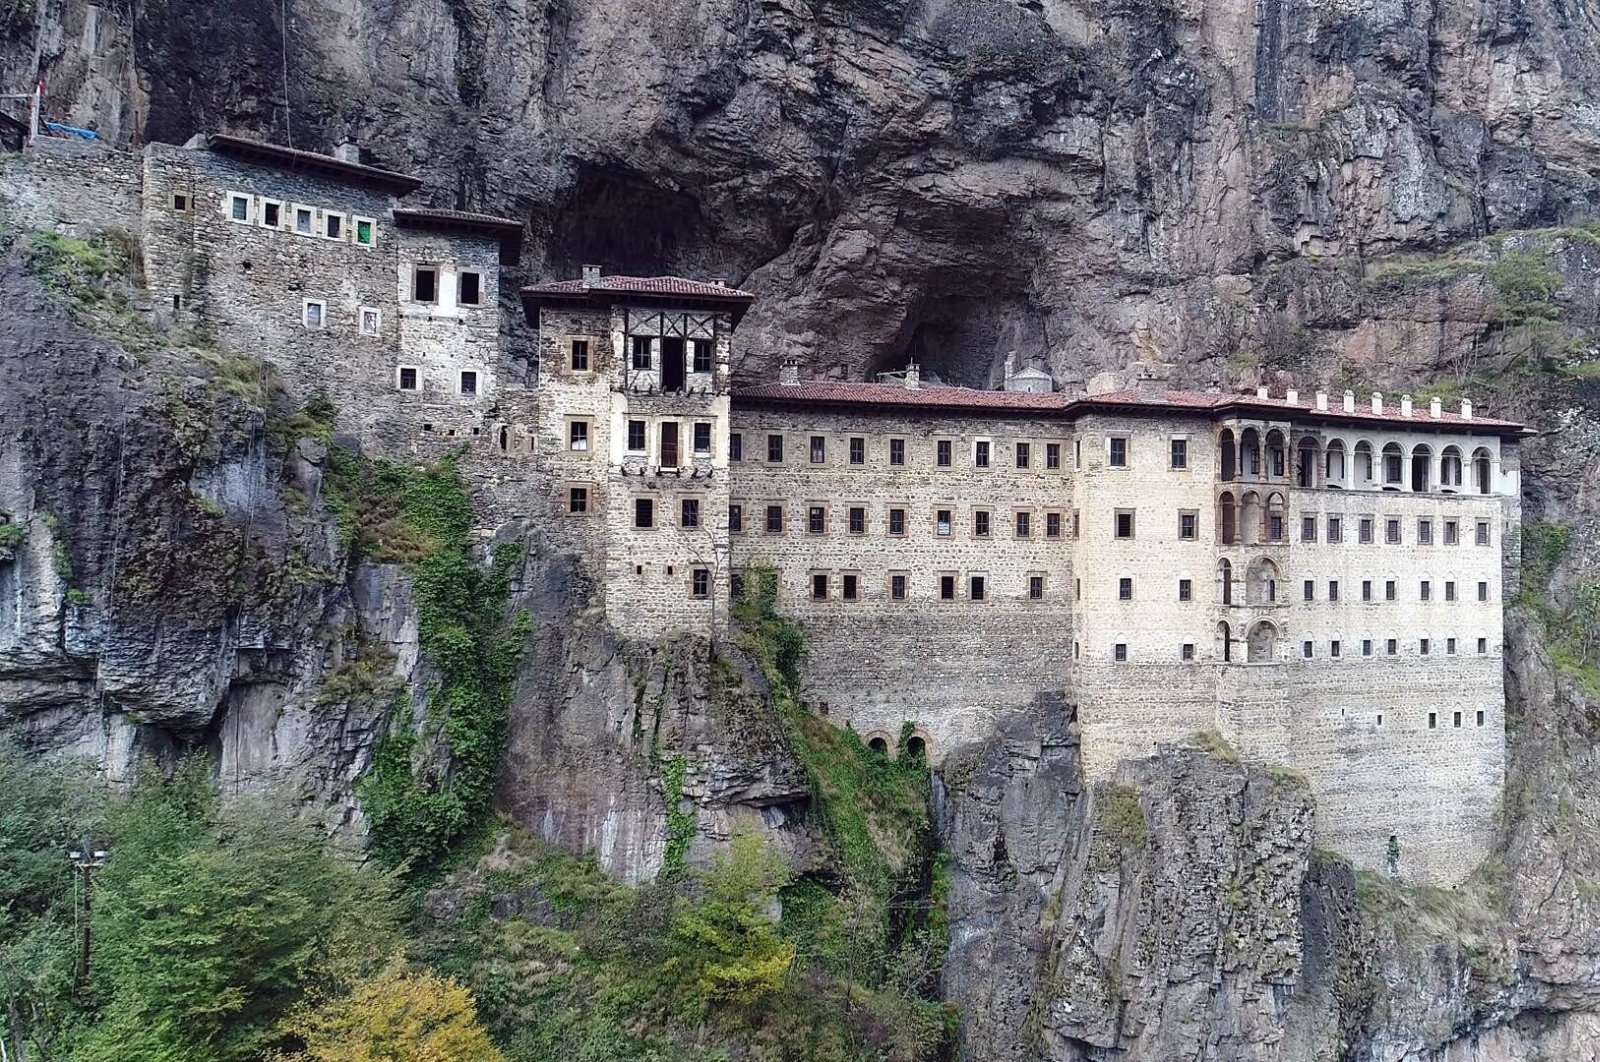 Sümela Monastery is carved out of rocks in a wooded area 300 meters above the Altındere Valley, Trabzon. (İHA PHOTO)